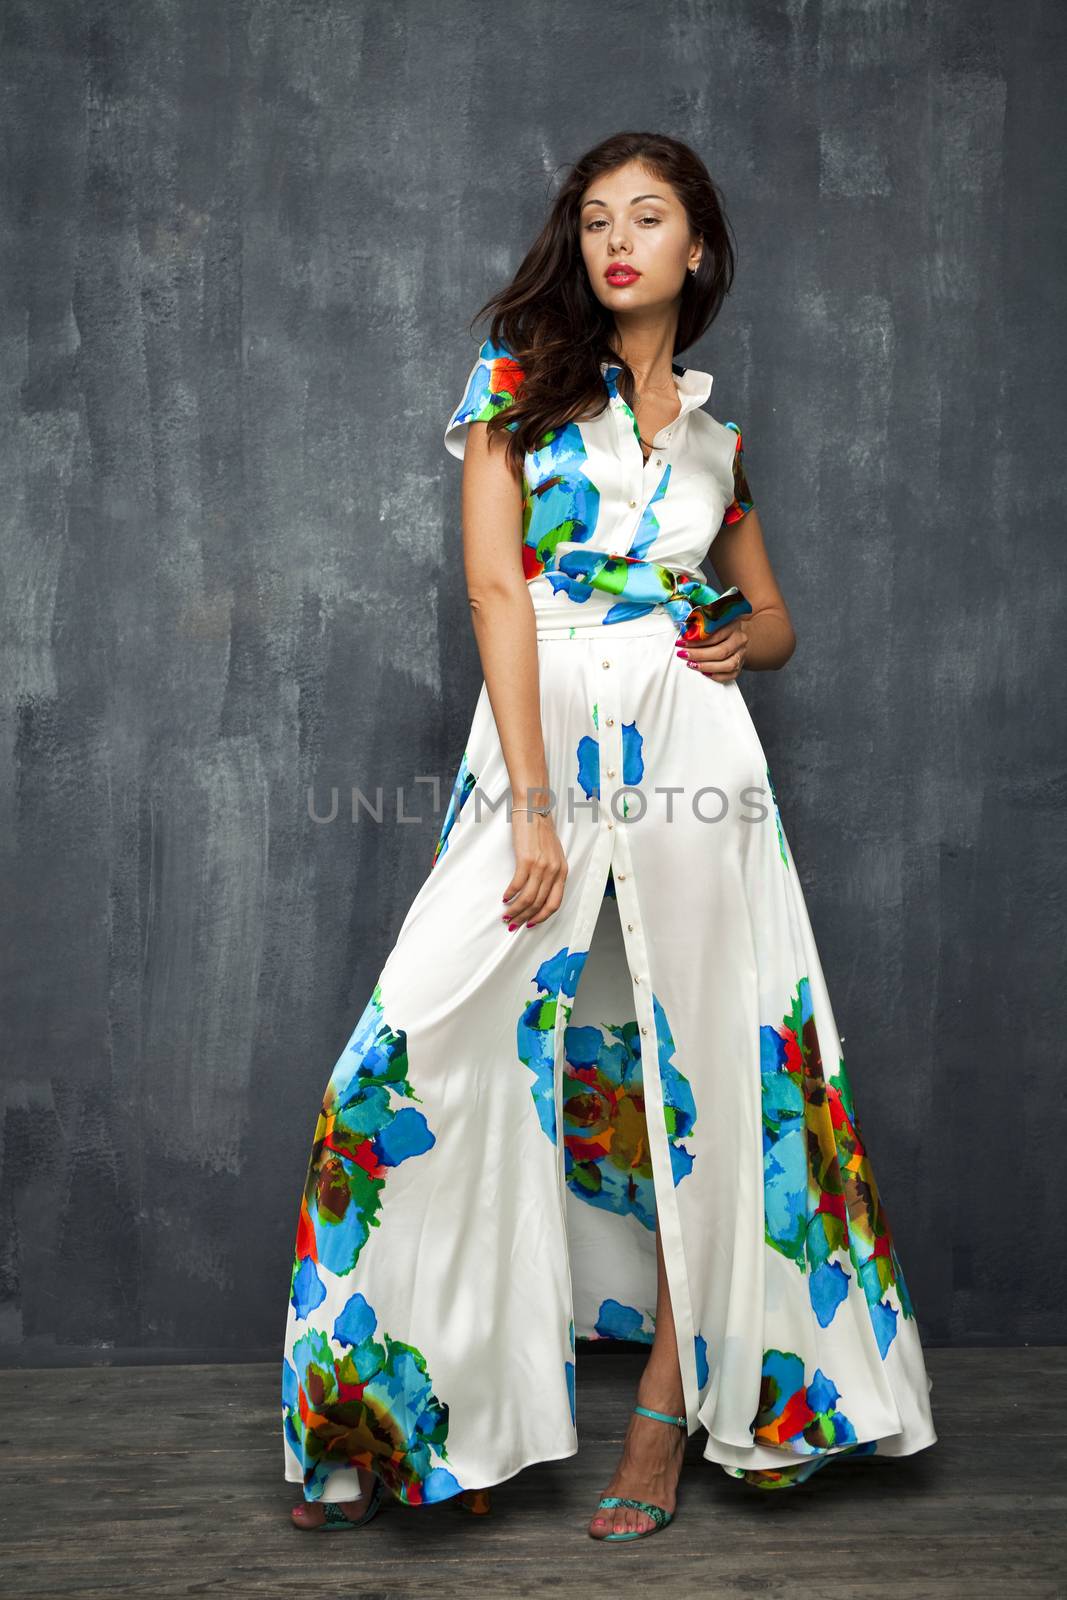 Glamour Portrait of young woman in white summer dress